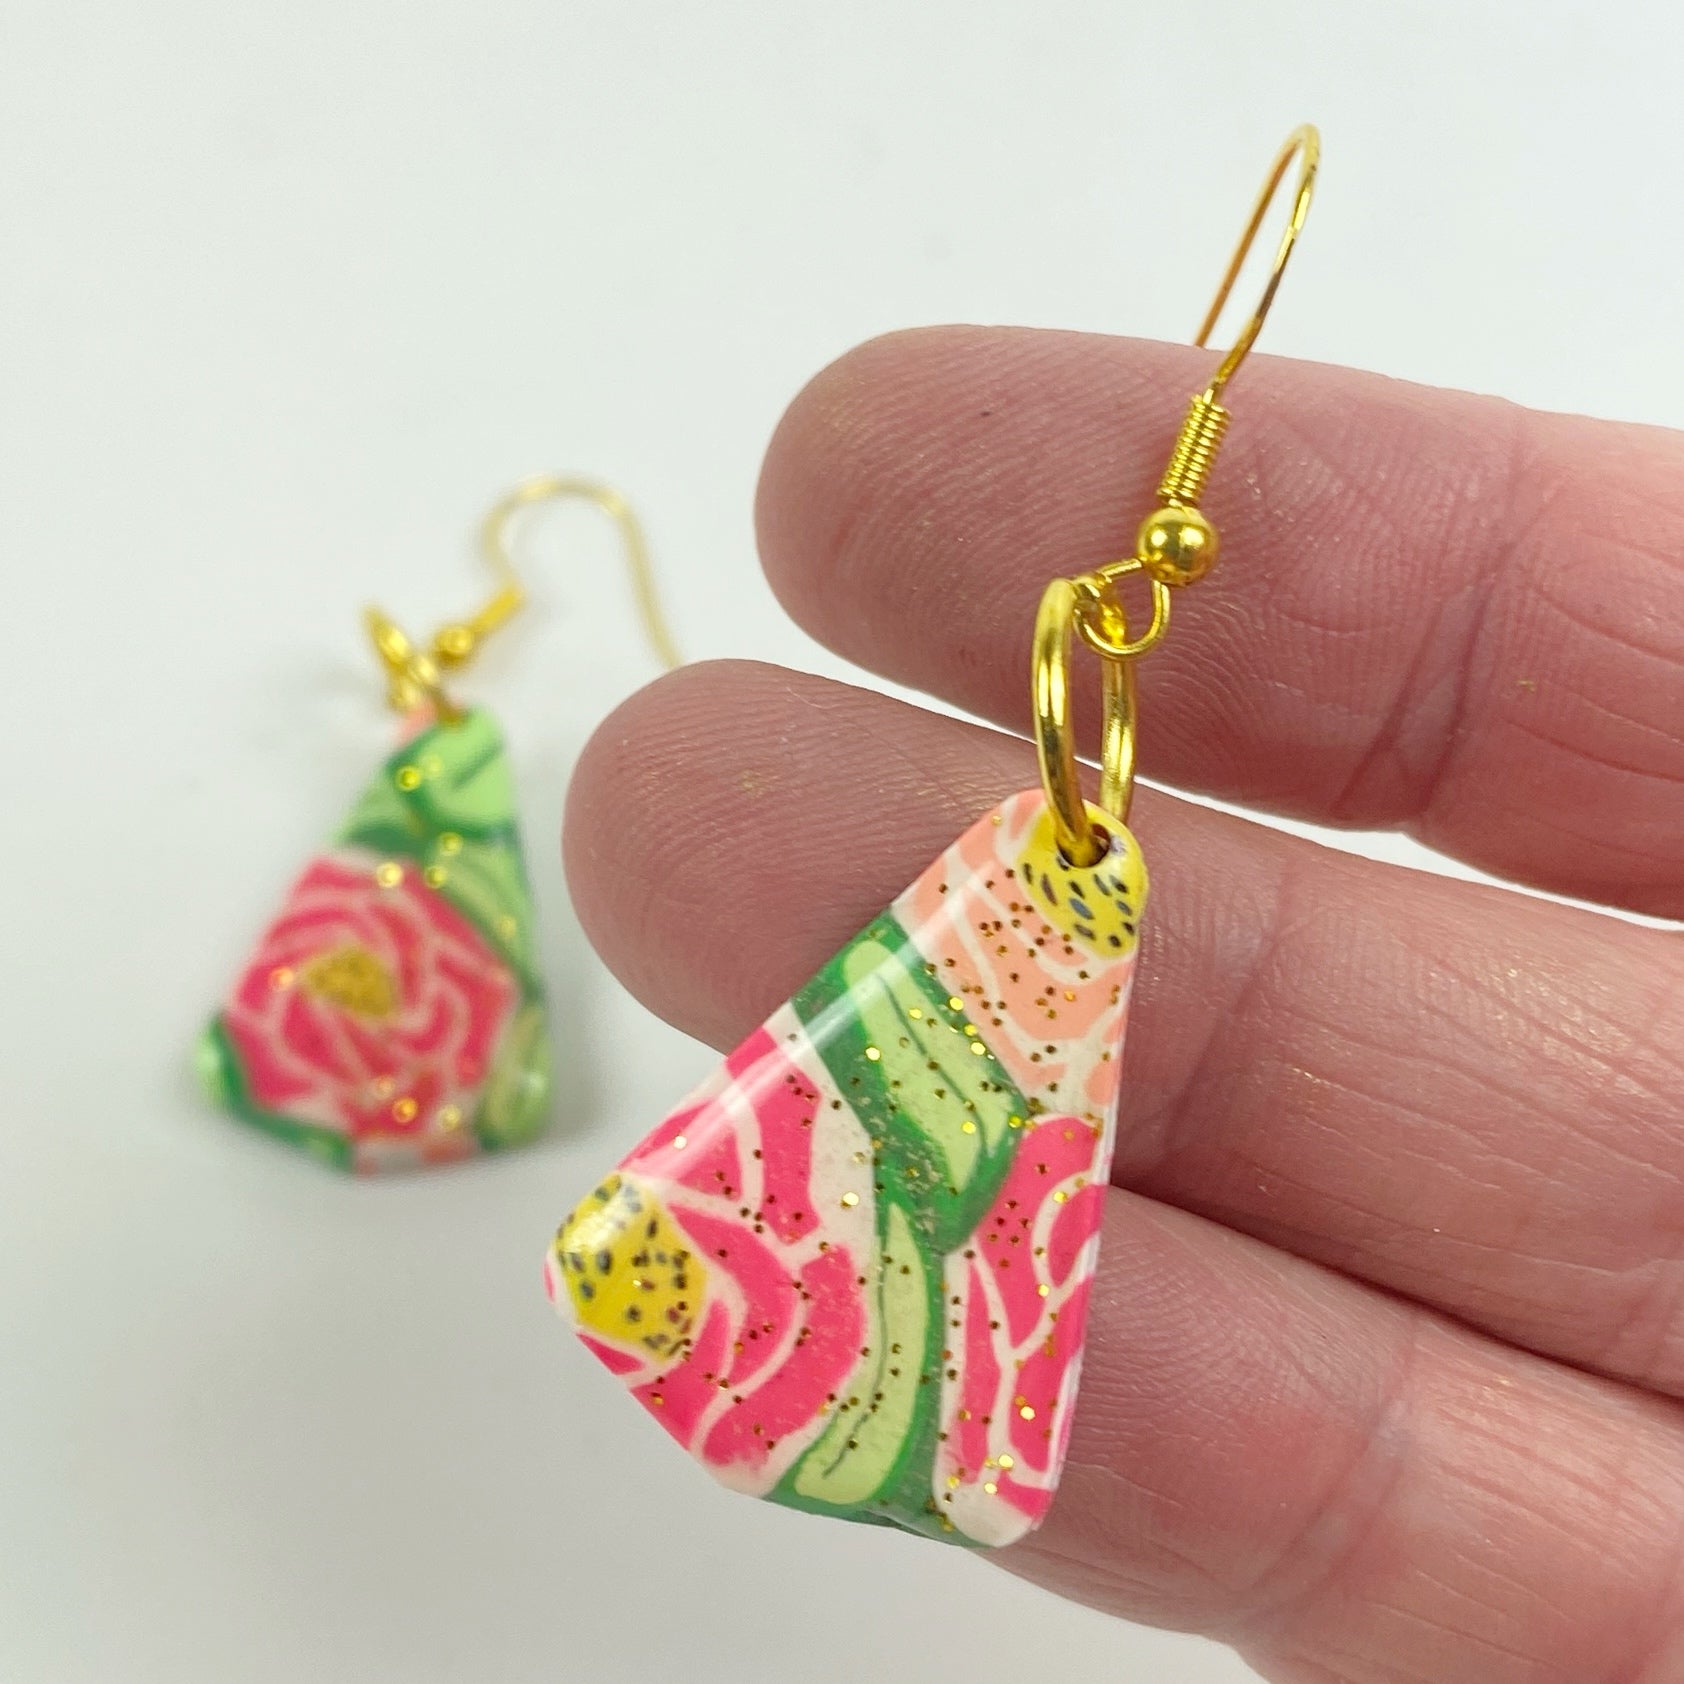 Whispering Roses Handmade Polymer Clay Dangle Earrings handheld for size reference